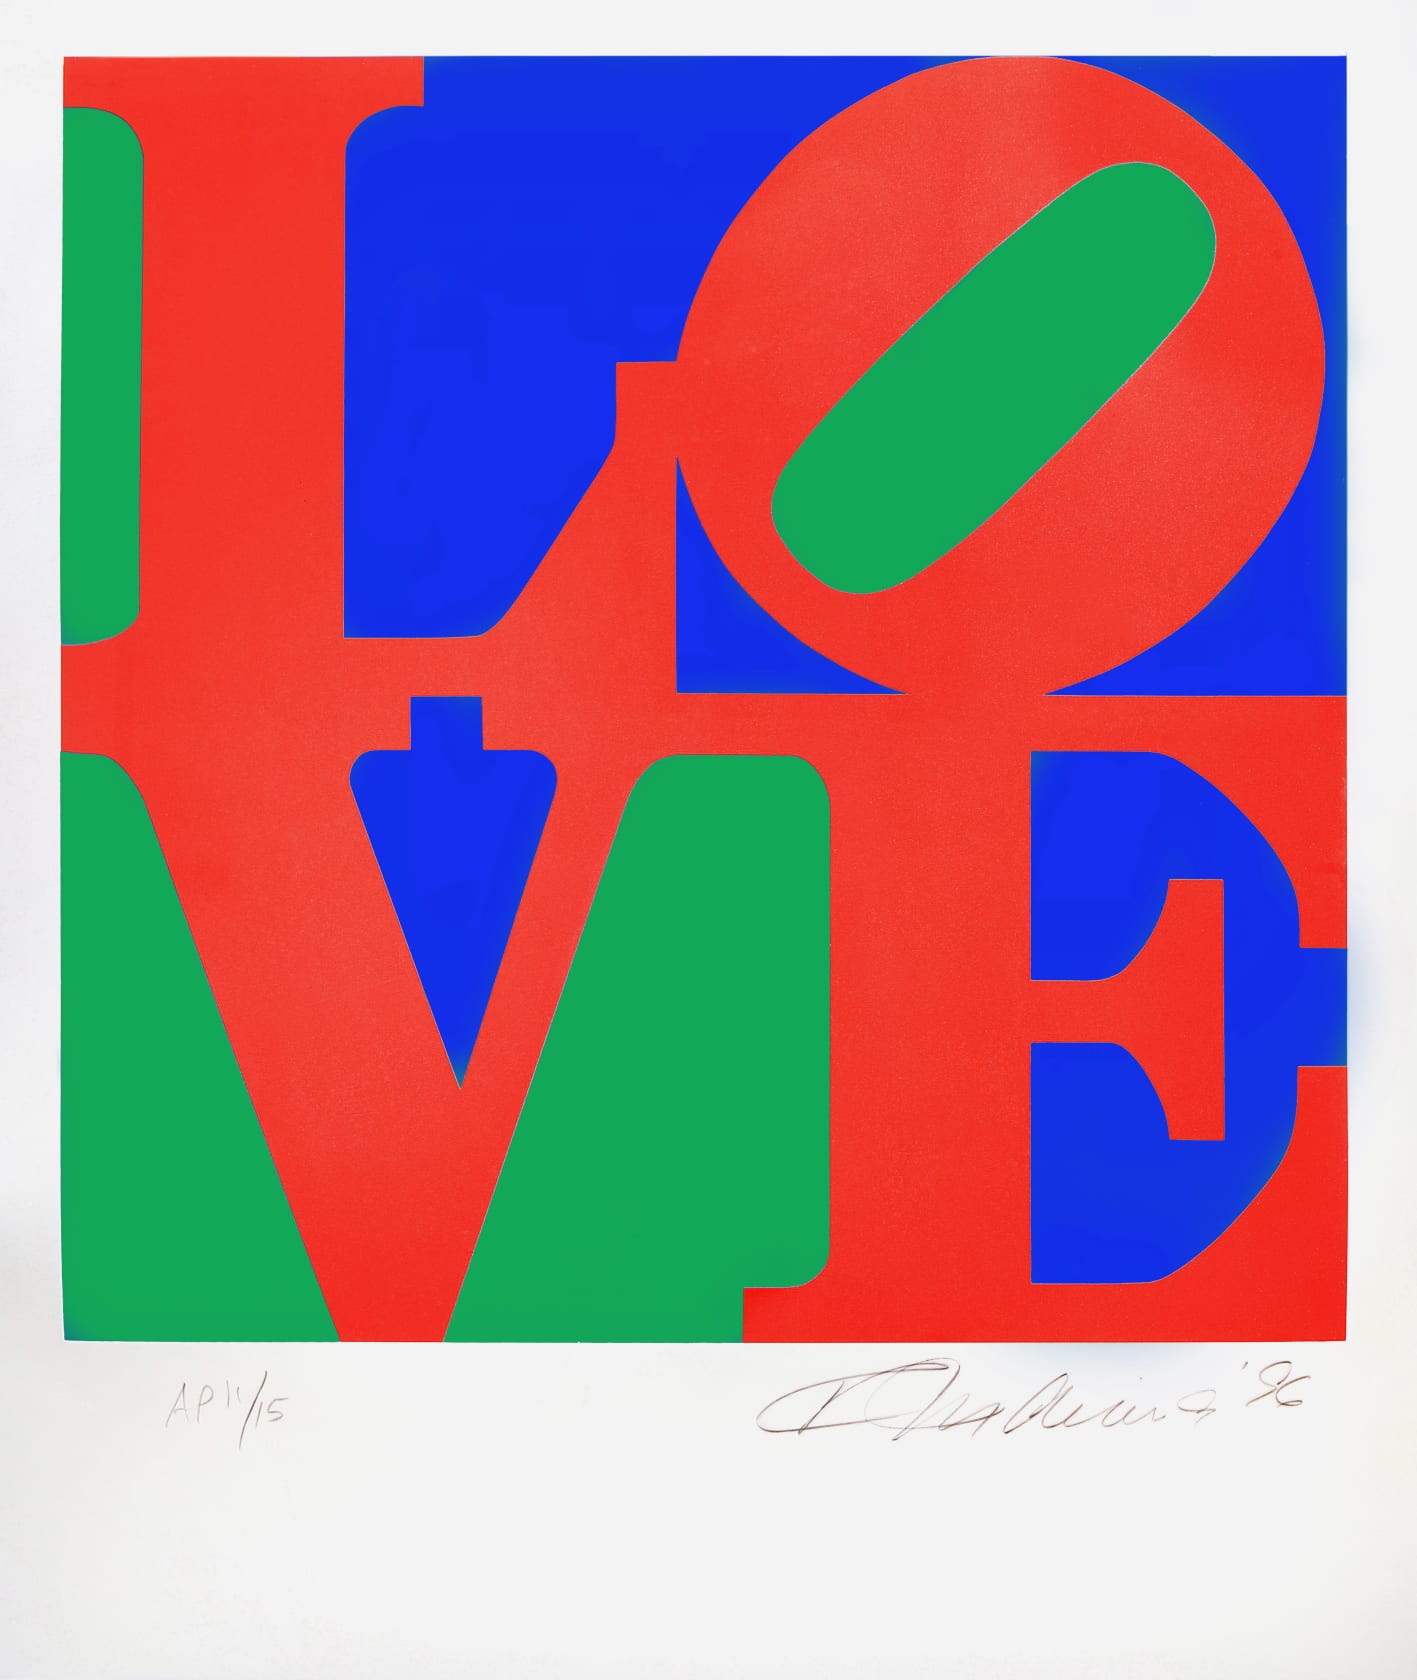 Robert Indiana, The Book of Love: One Plate, 1997